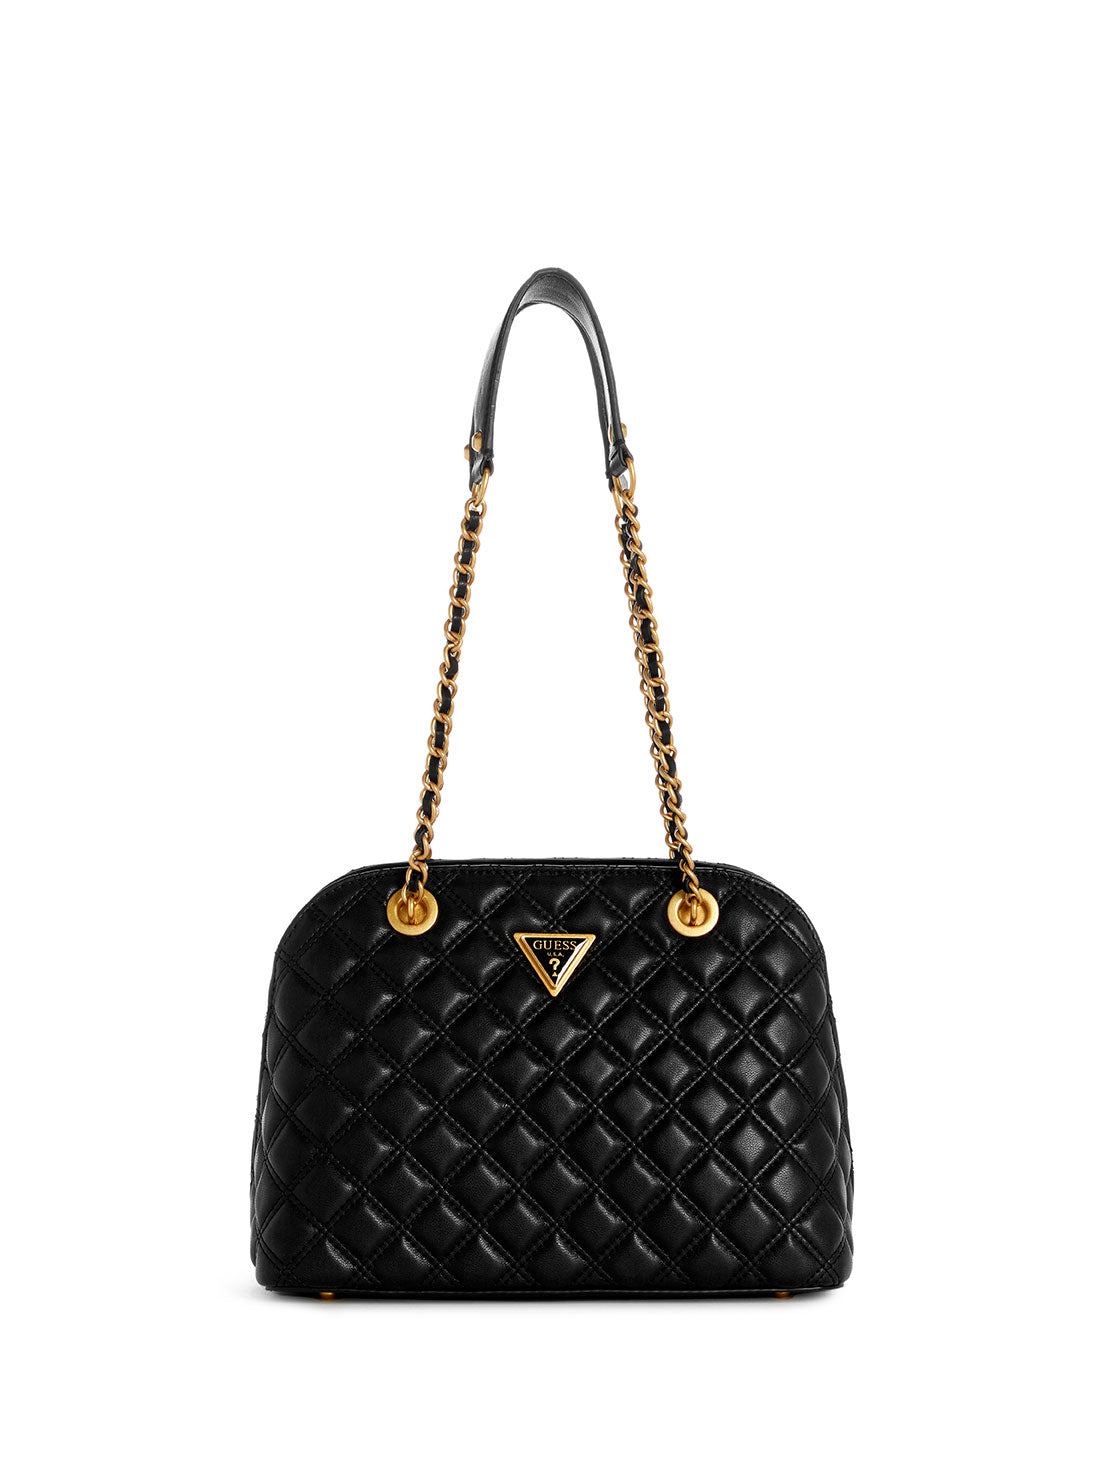 GUESS Black Giully Dome Satchel Bag front view